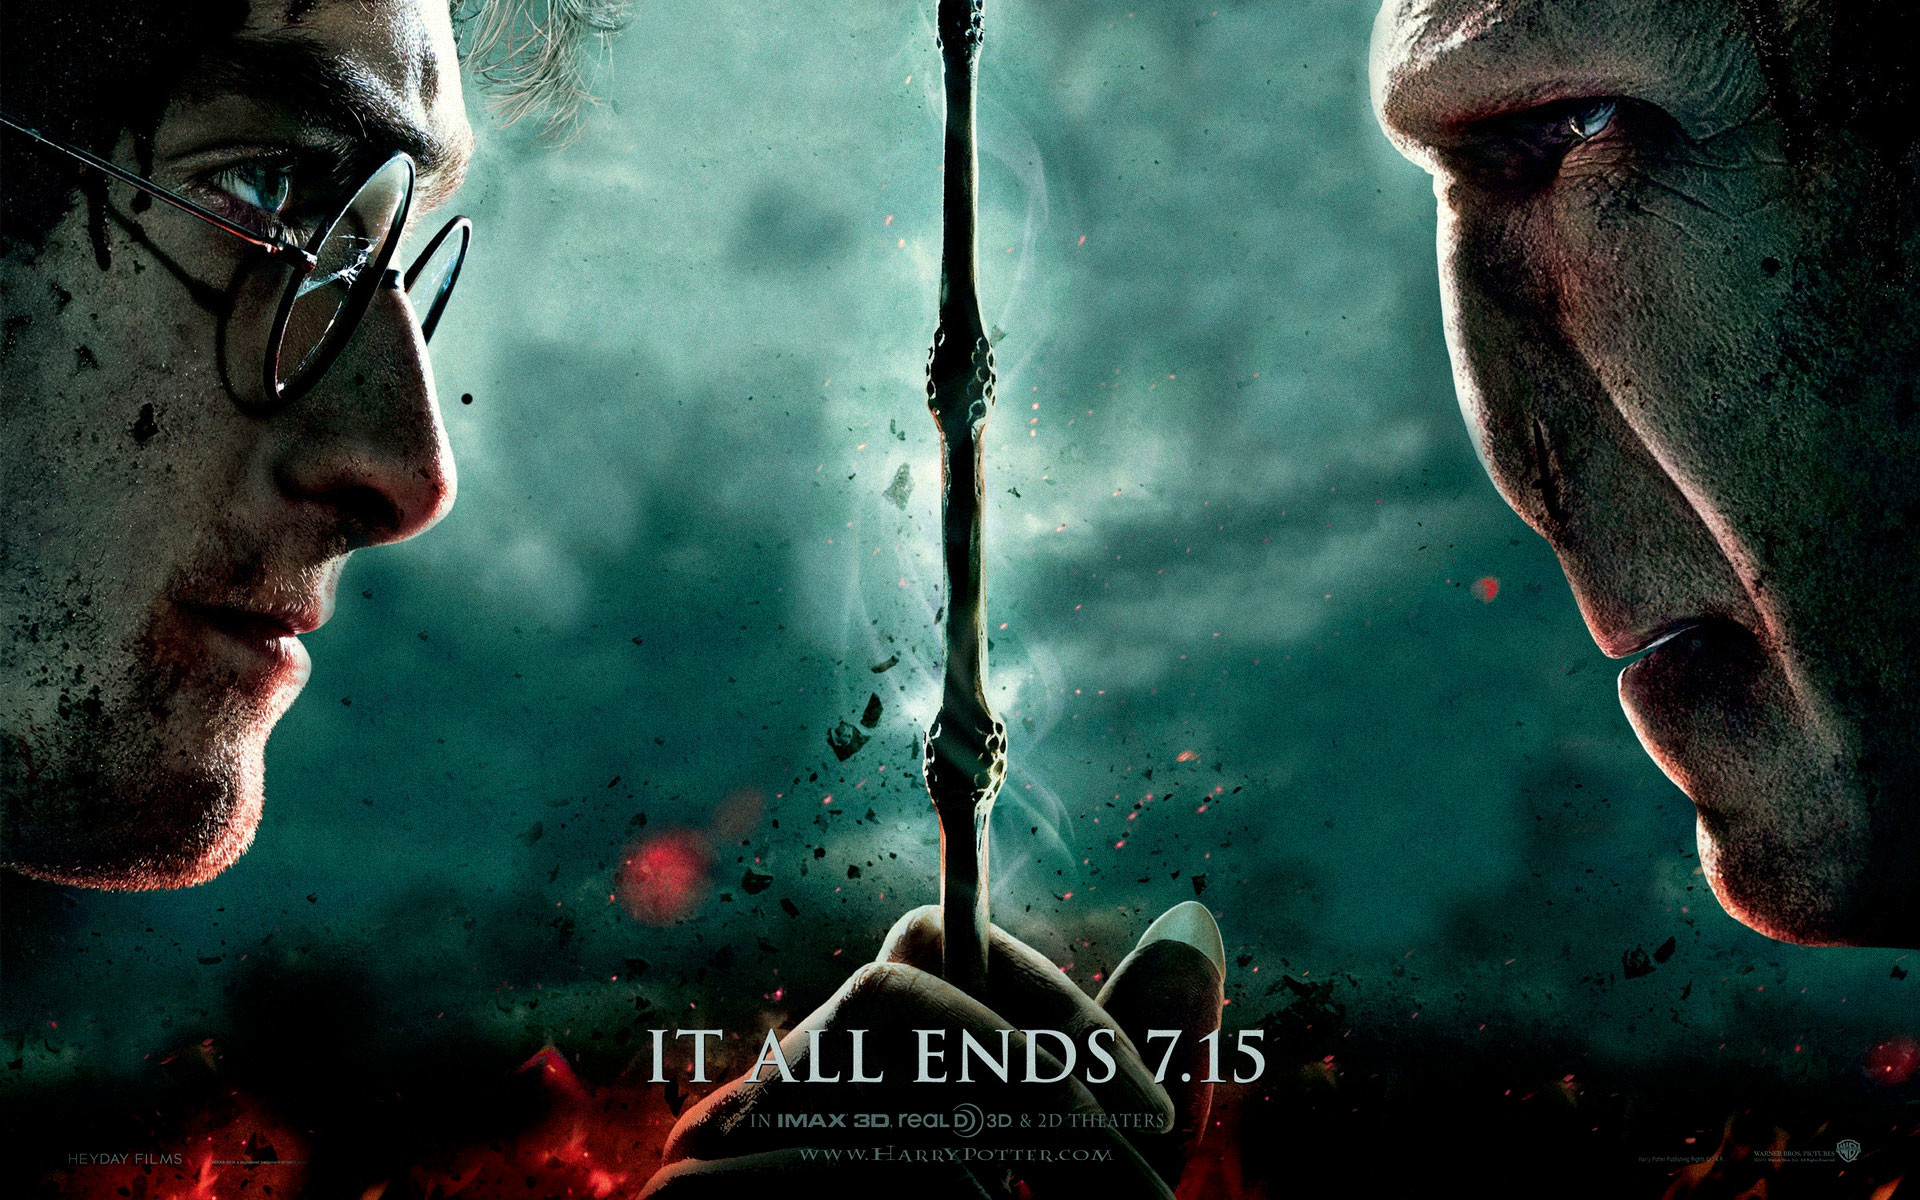 Harry Potter 7 Part 2 Wallpapers | HD Wallpapers